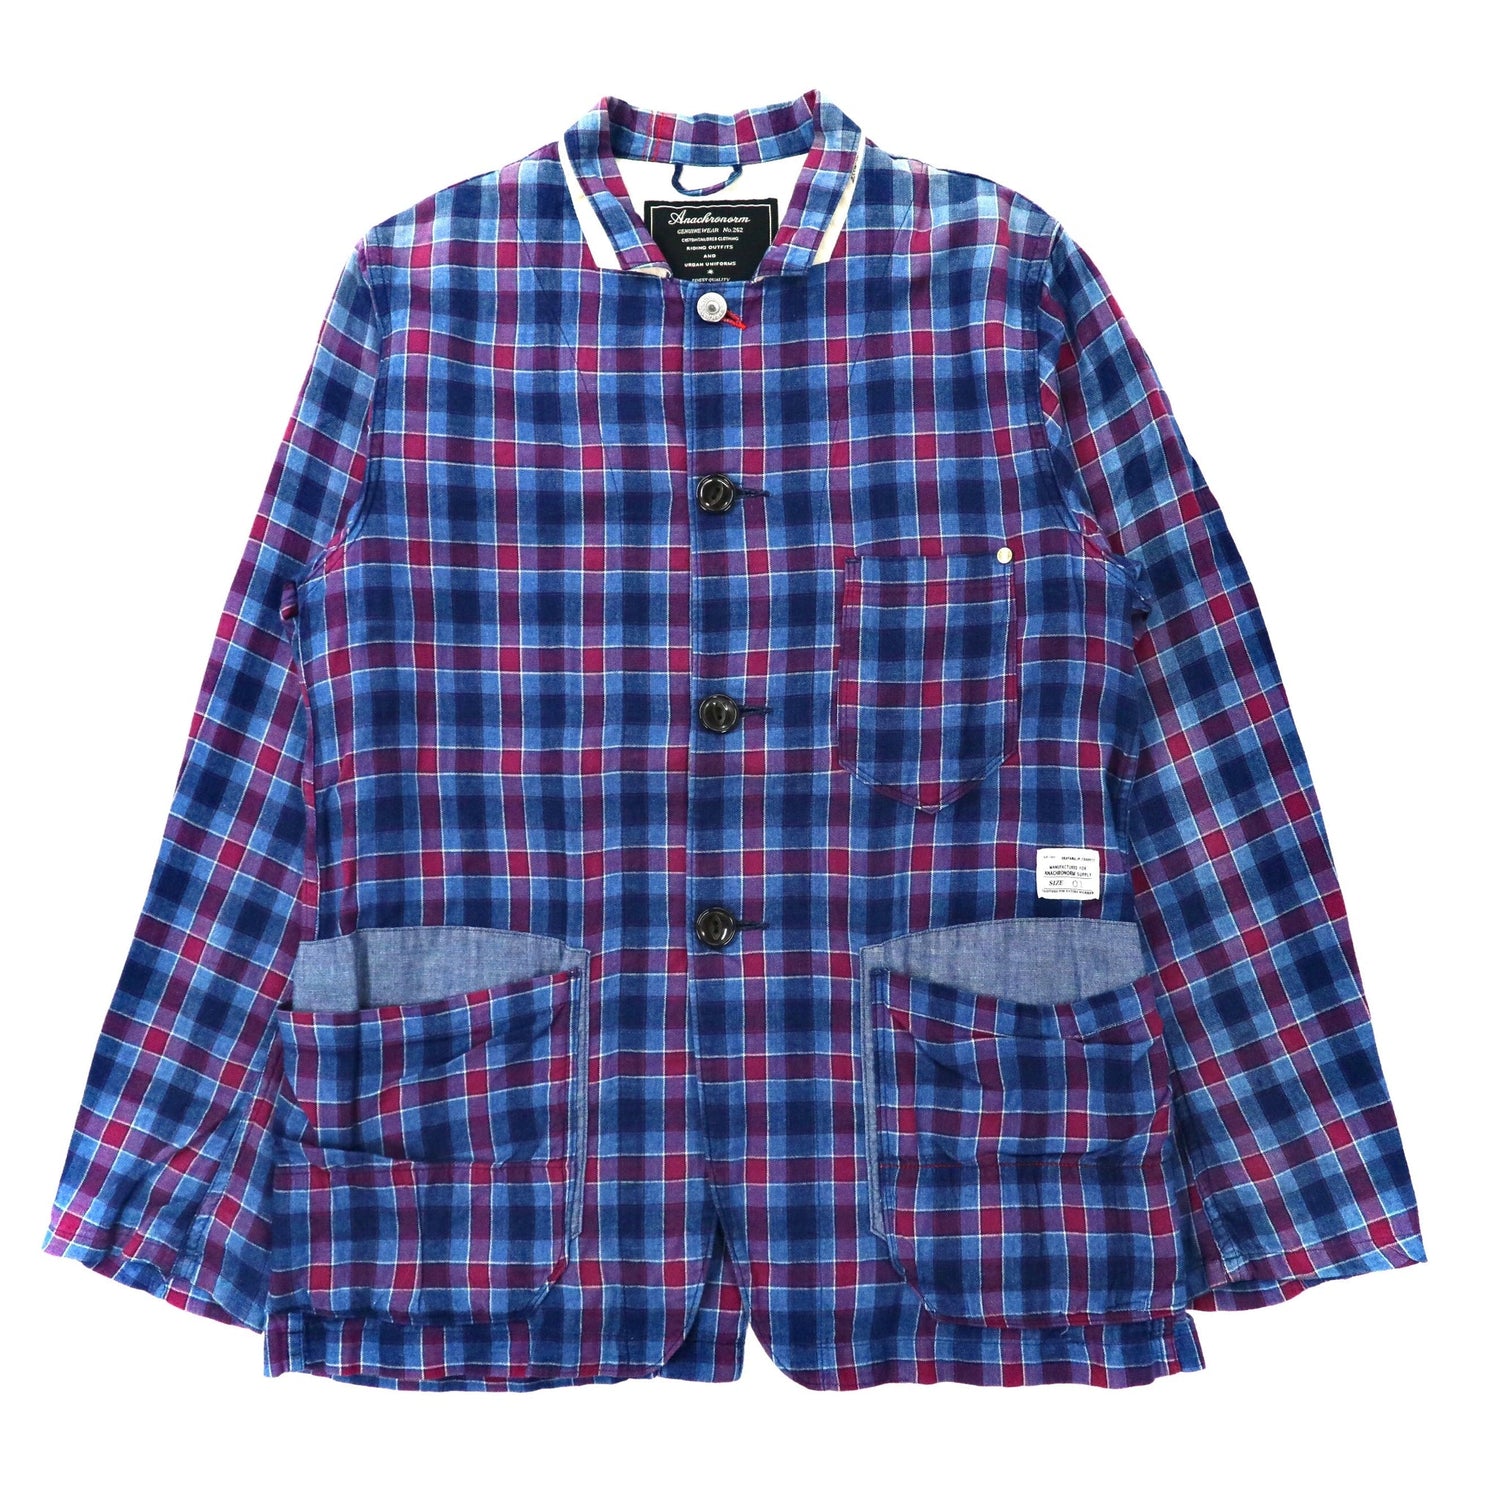 Anachronorm Coverall Shirt 1 Blue CHECKED Cotton Japan Made